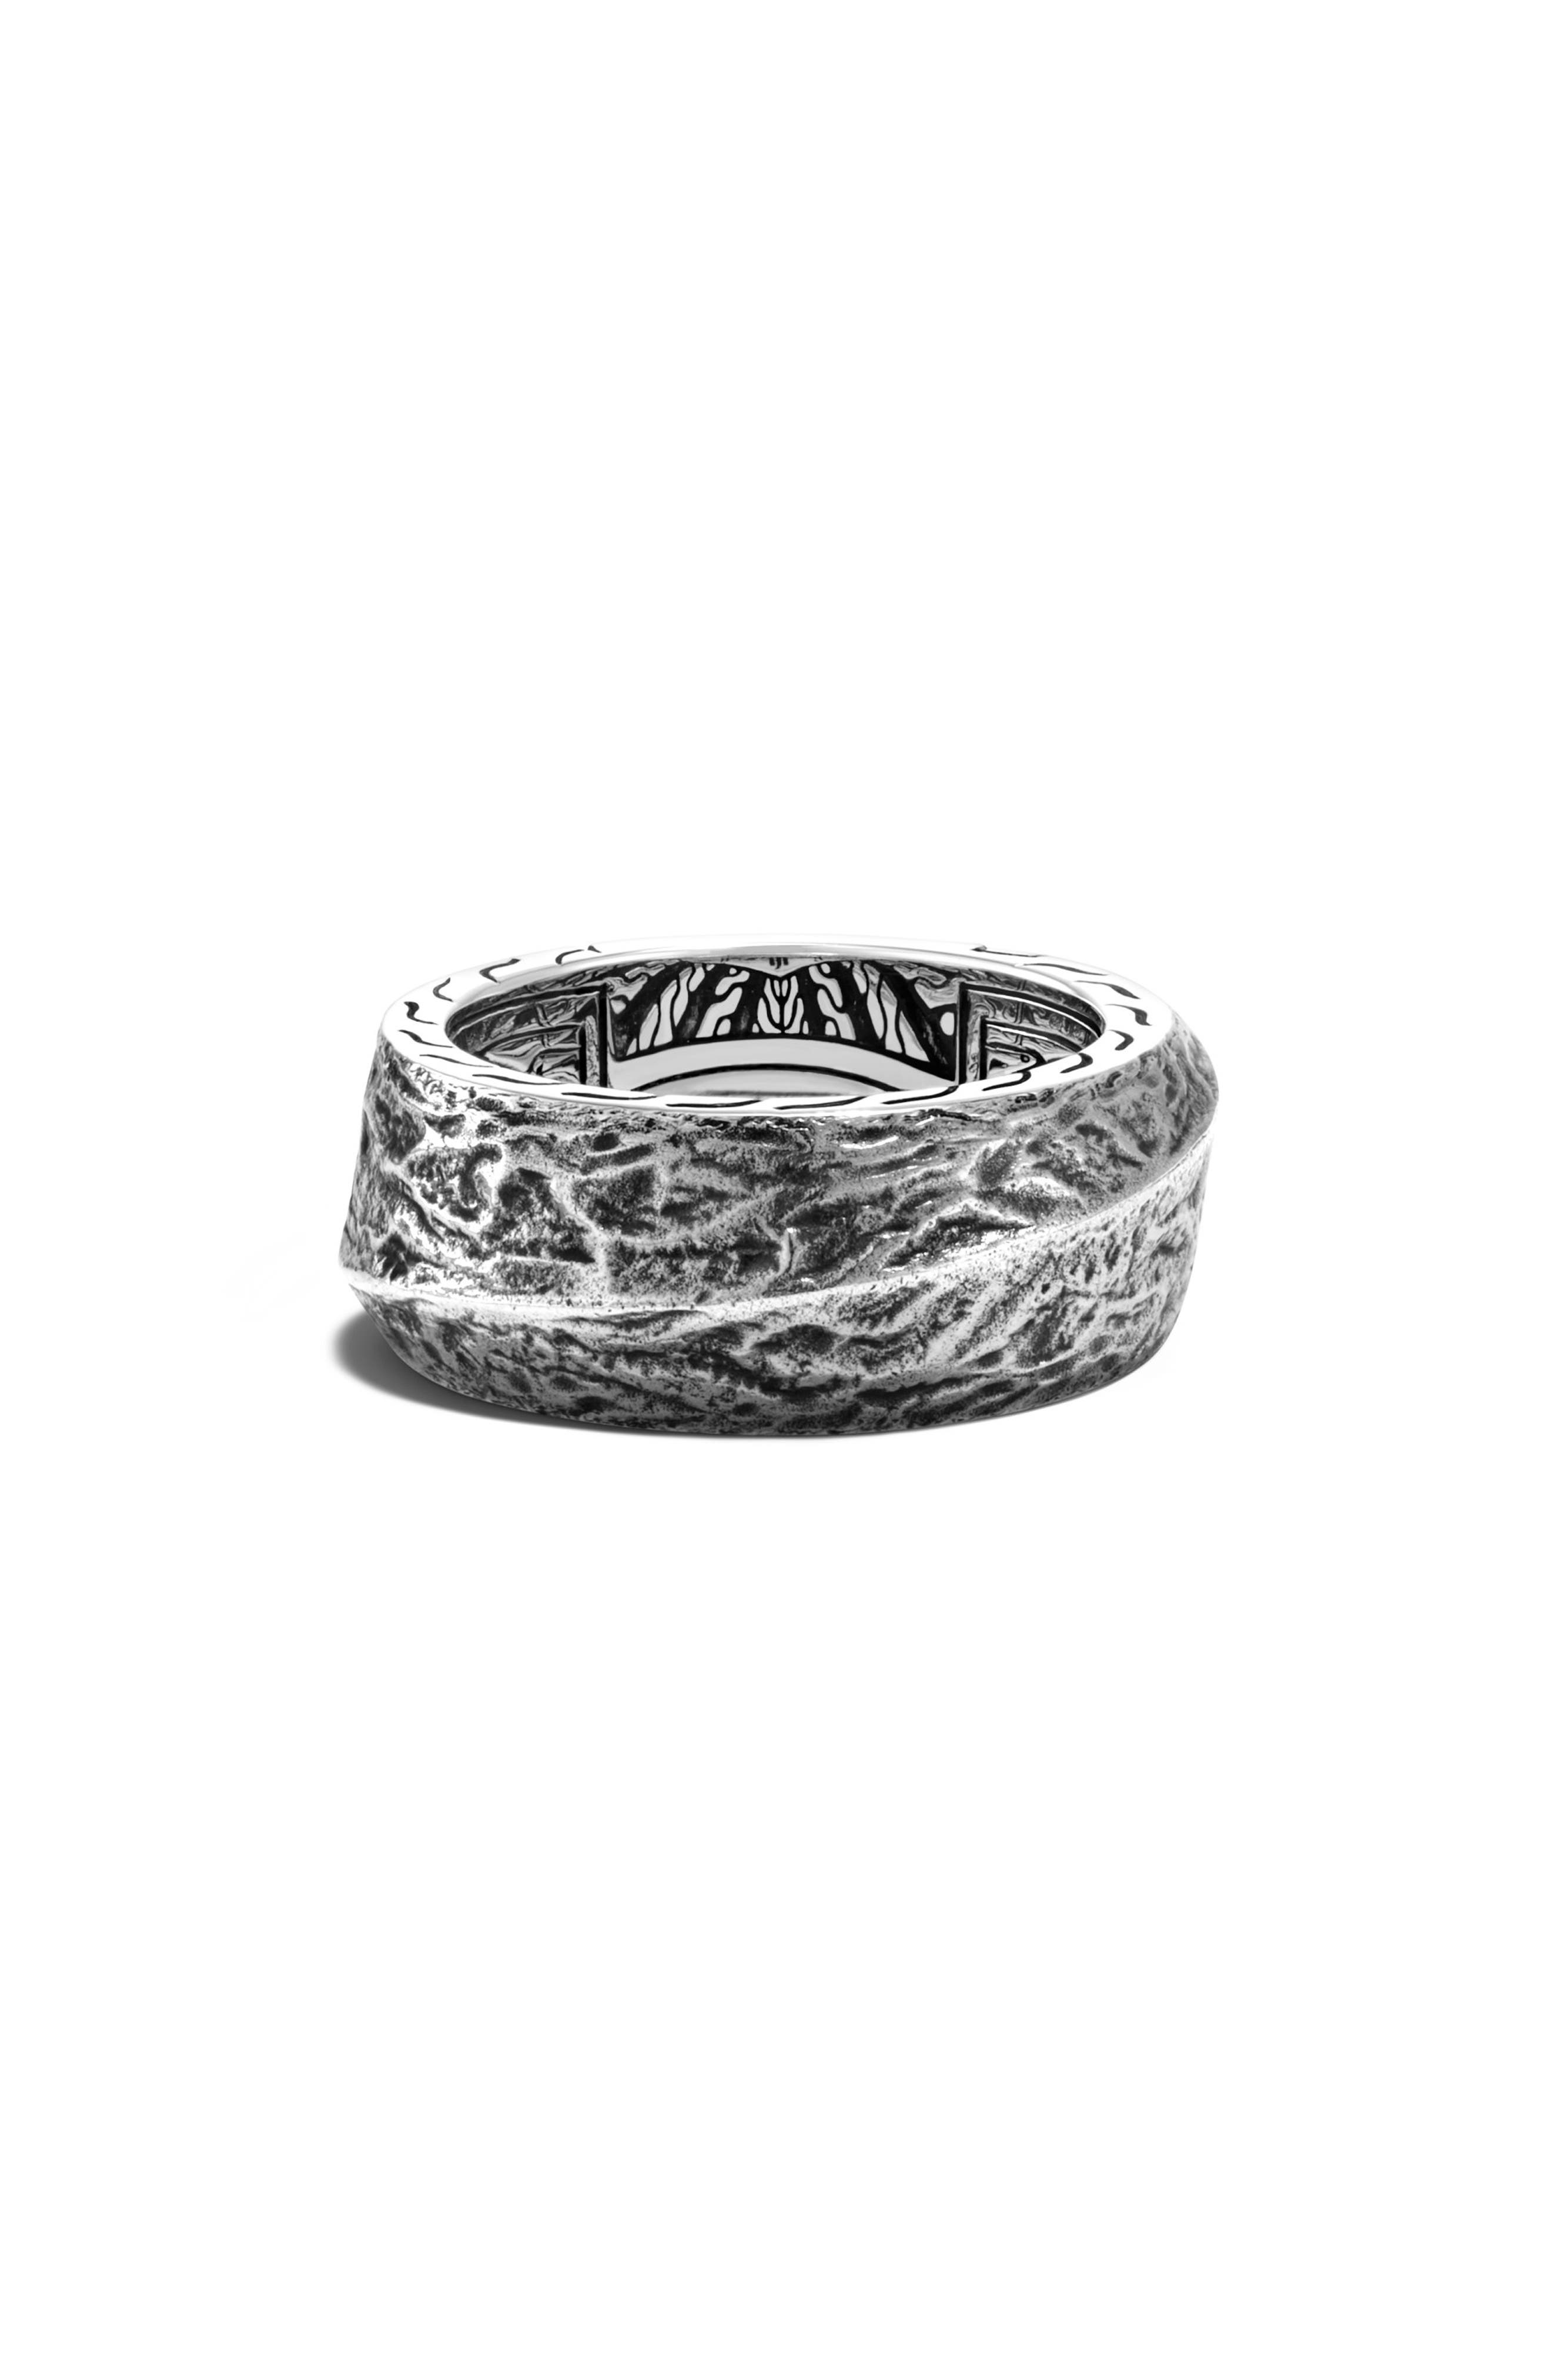 John Hardy Men's Classic Chain Reclaimed Band Ring in Silver at Nordstrom